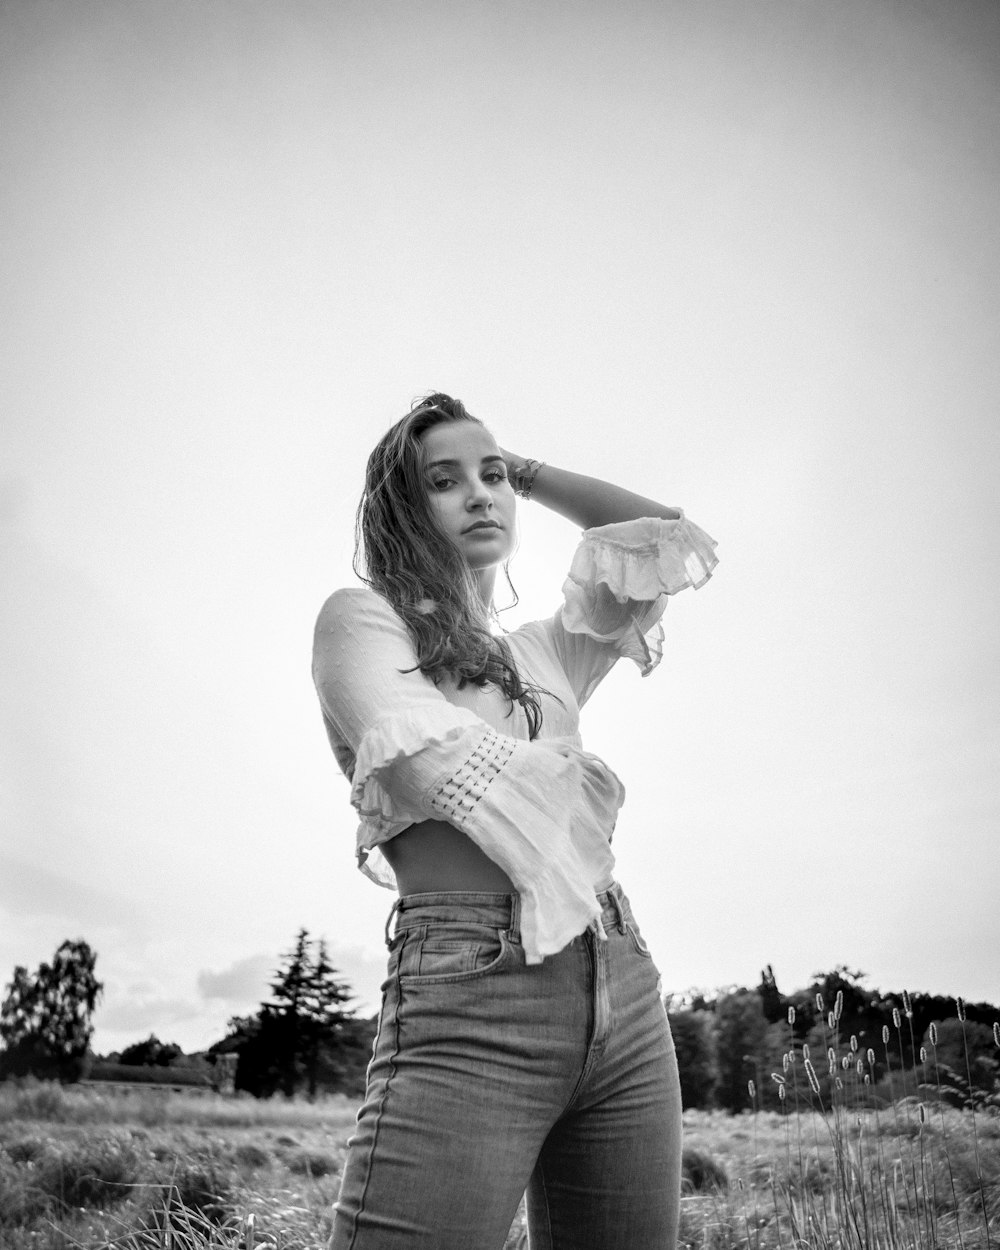 grayscale photo of woman in white long sleeve shirt and gray denim jeans